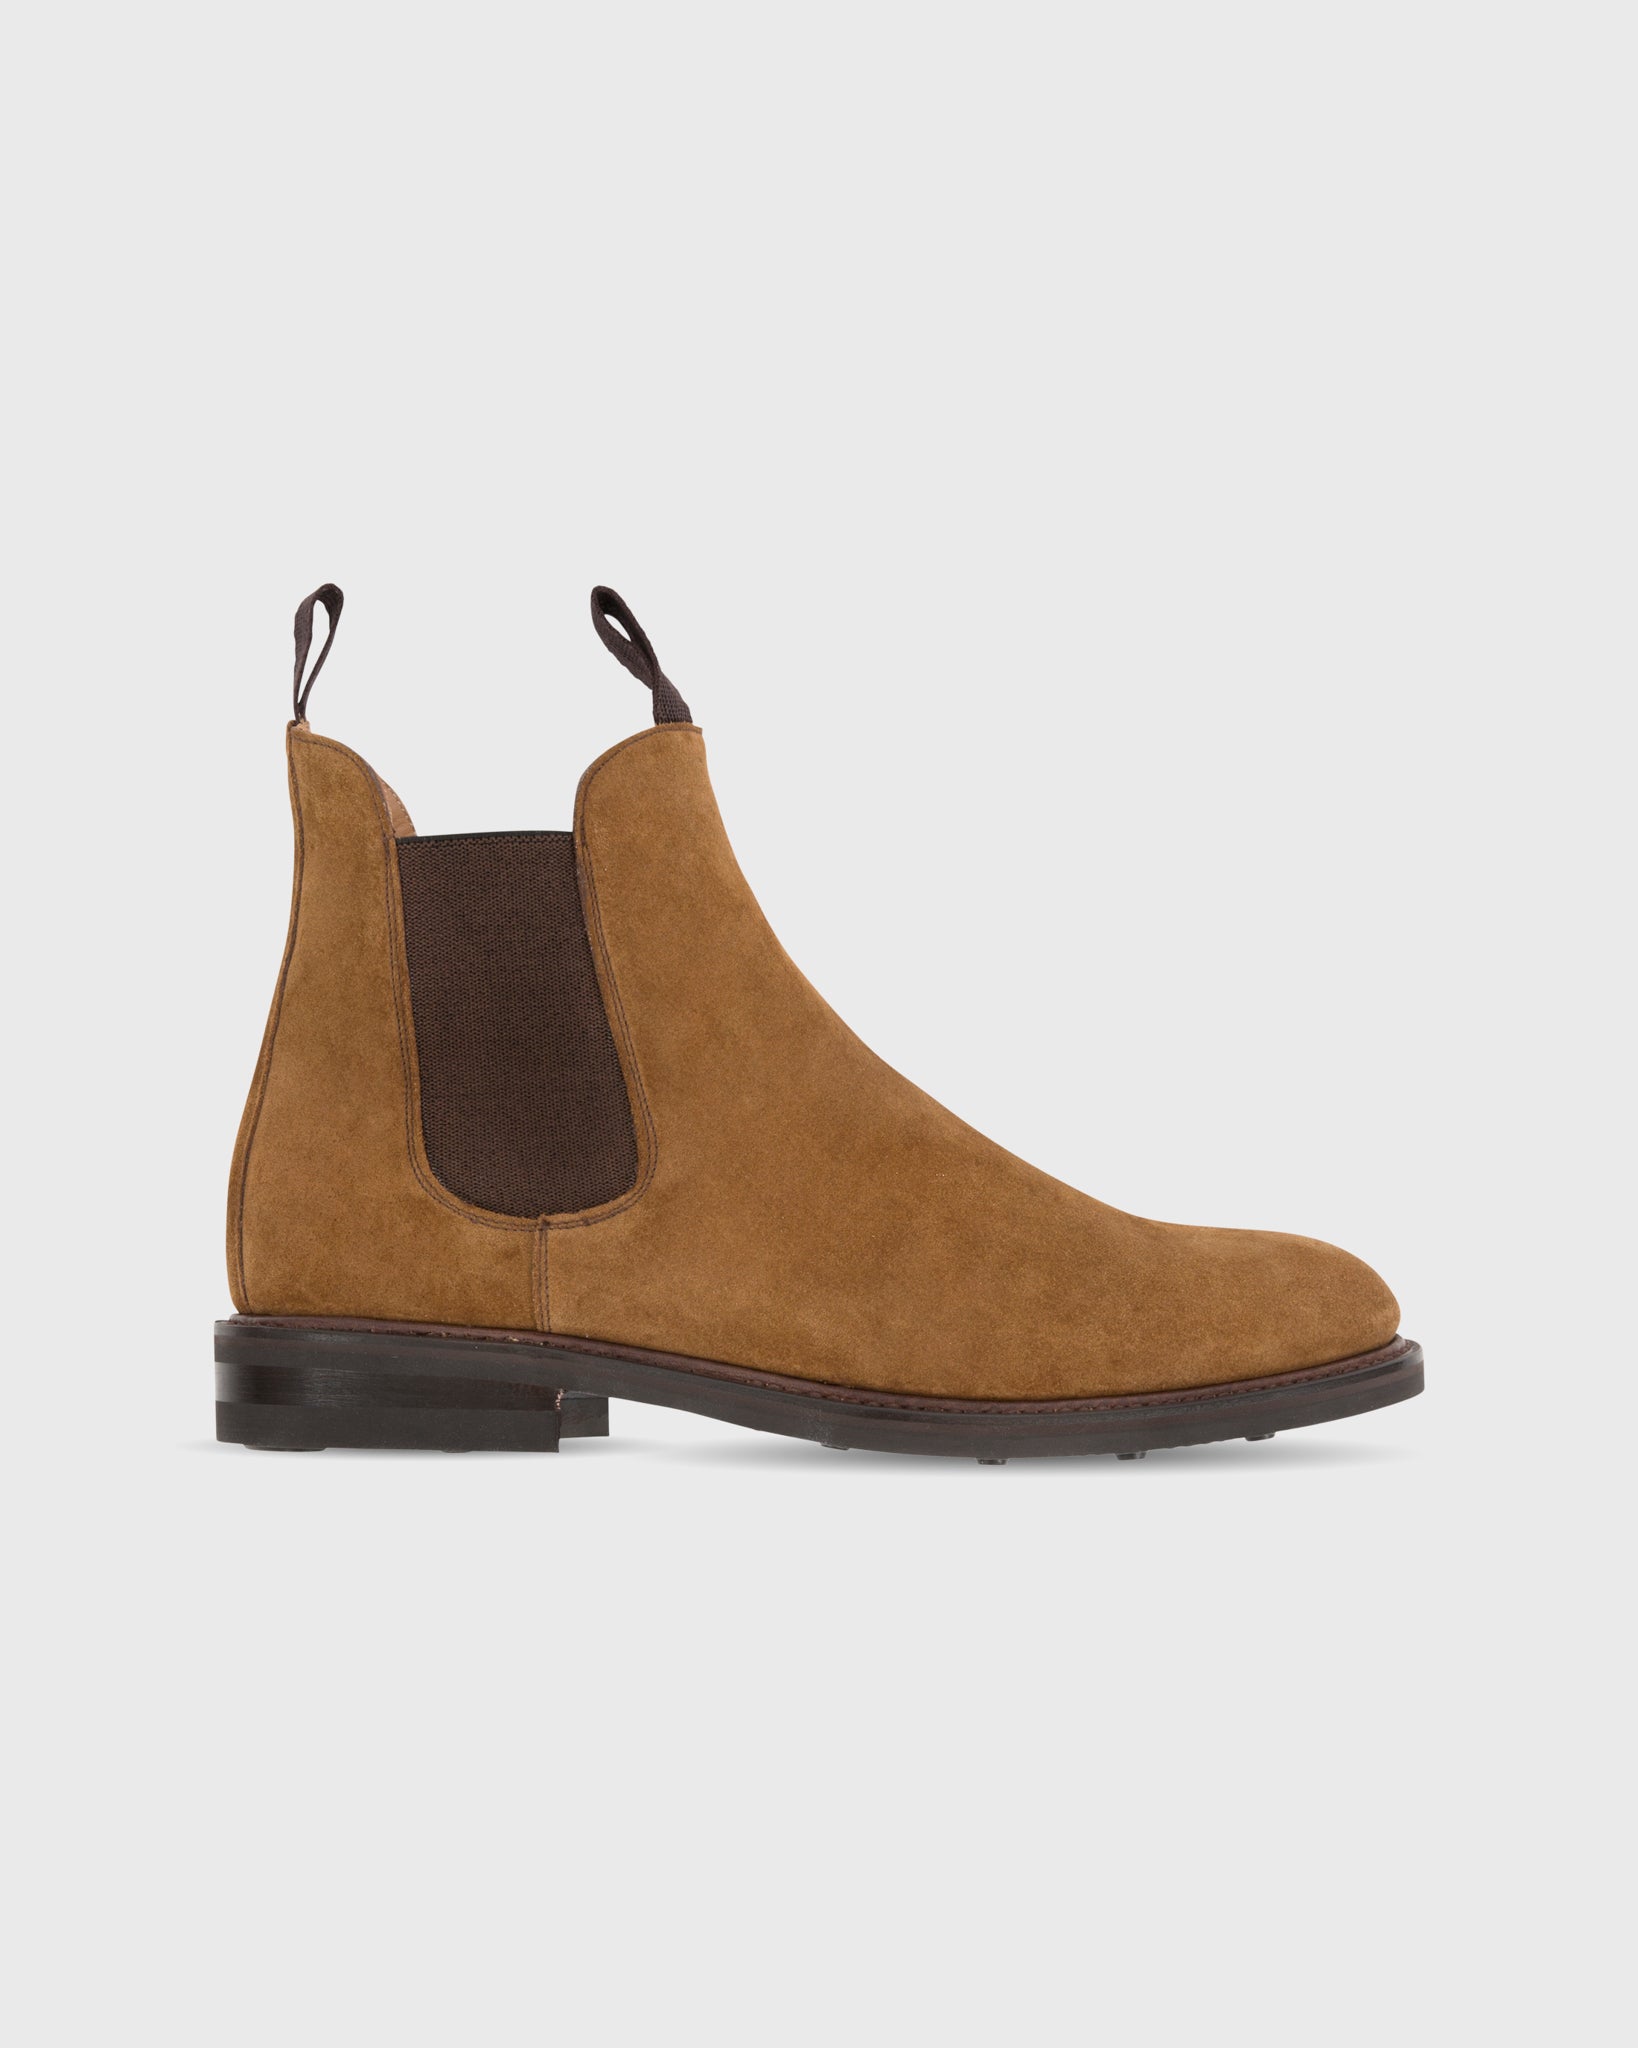 Chelsea Boot with Storm Welt in Tobacco Suede | Shop Sid Mashburn